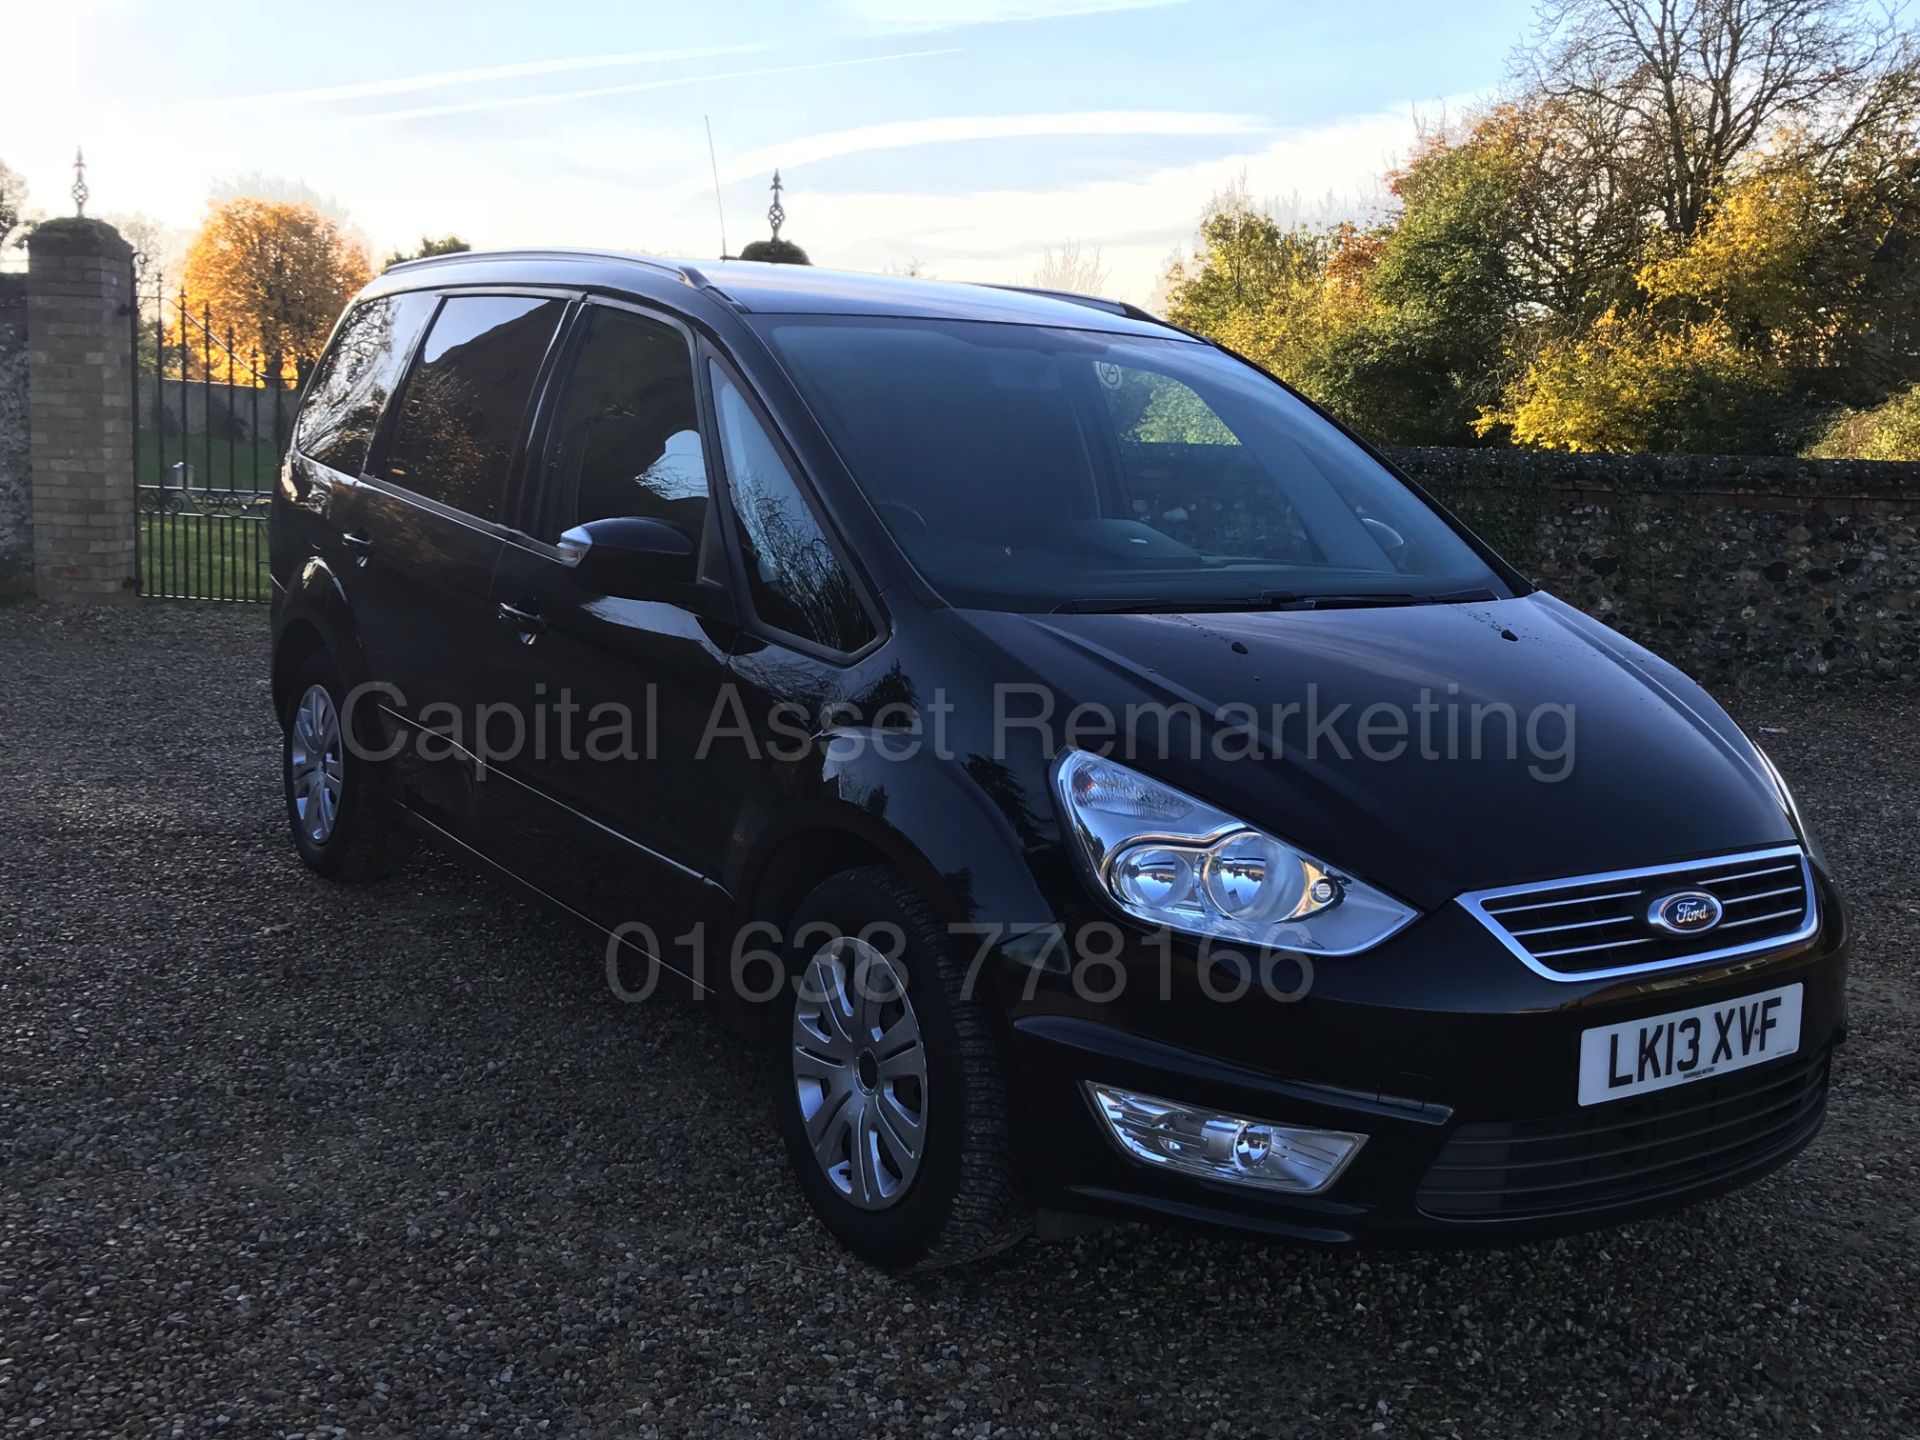 (On Sale) FORD GALAXY 'ZETEC' 7 SEATER MPV (2013) '2.0 TDCI -140 BHP' (1 OWNER) *FULL HISTORY*